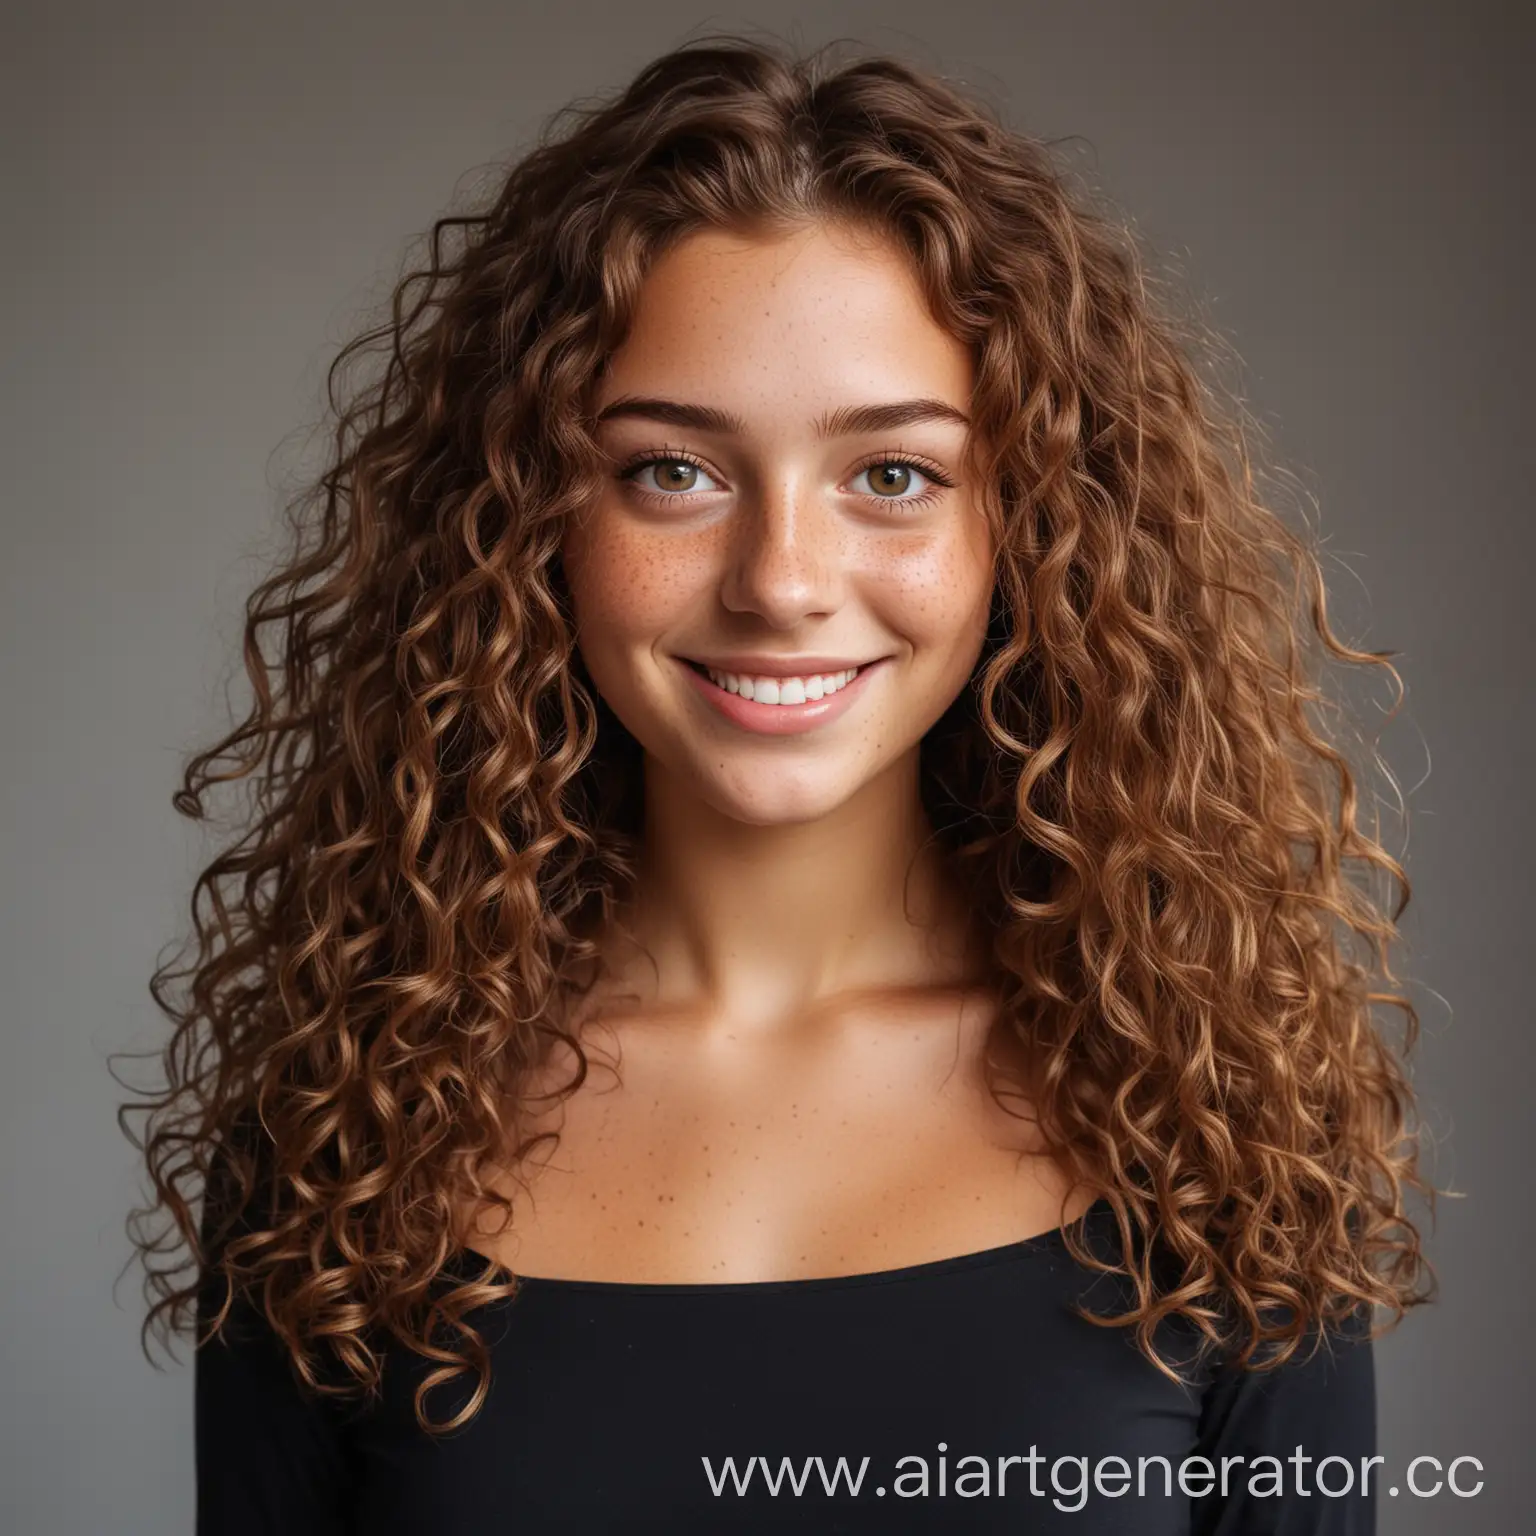 Beautiful-Smiling-Girl-in-Elegant-Black-Dress-with-Long-Curly-Hair-and-Freckles